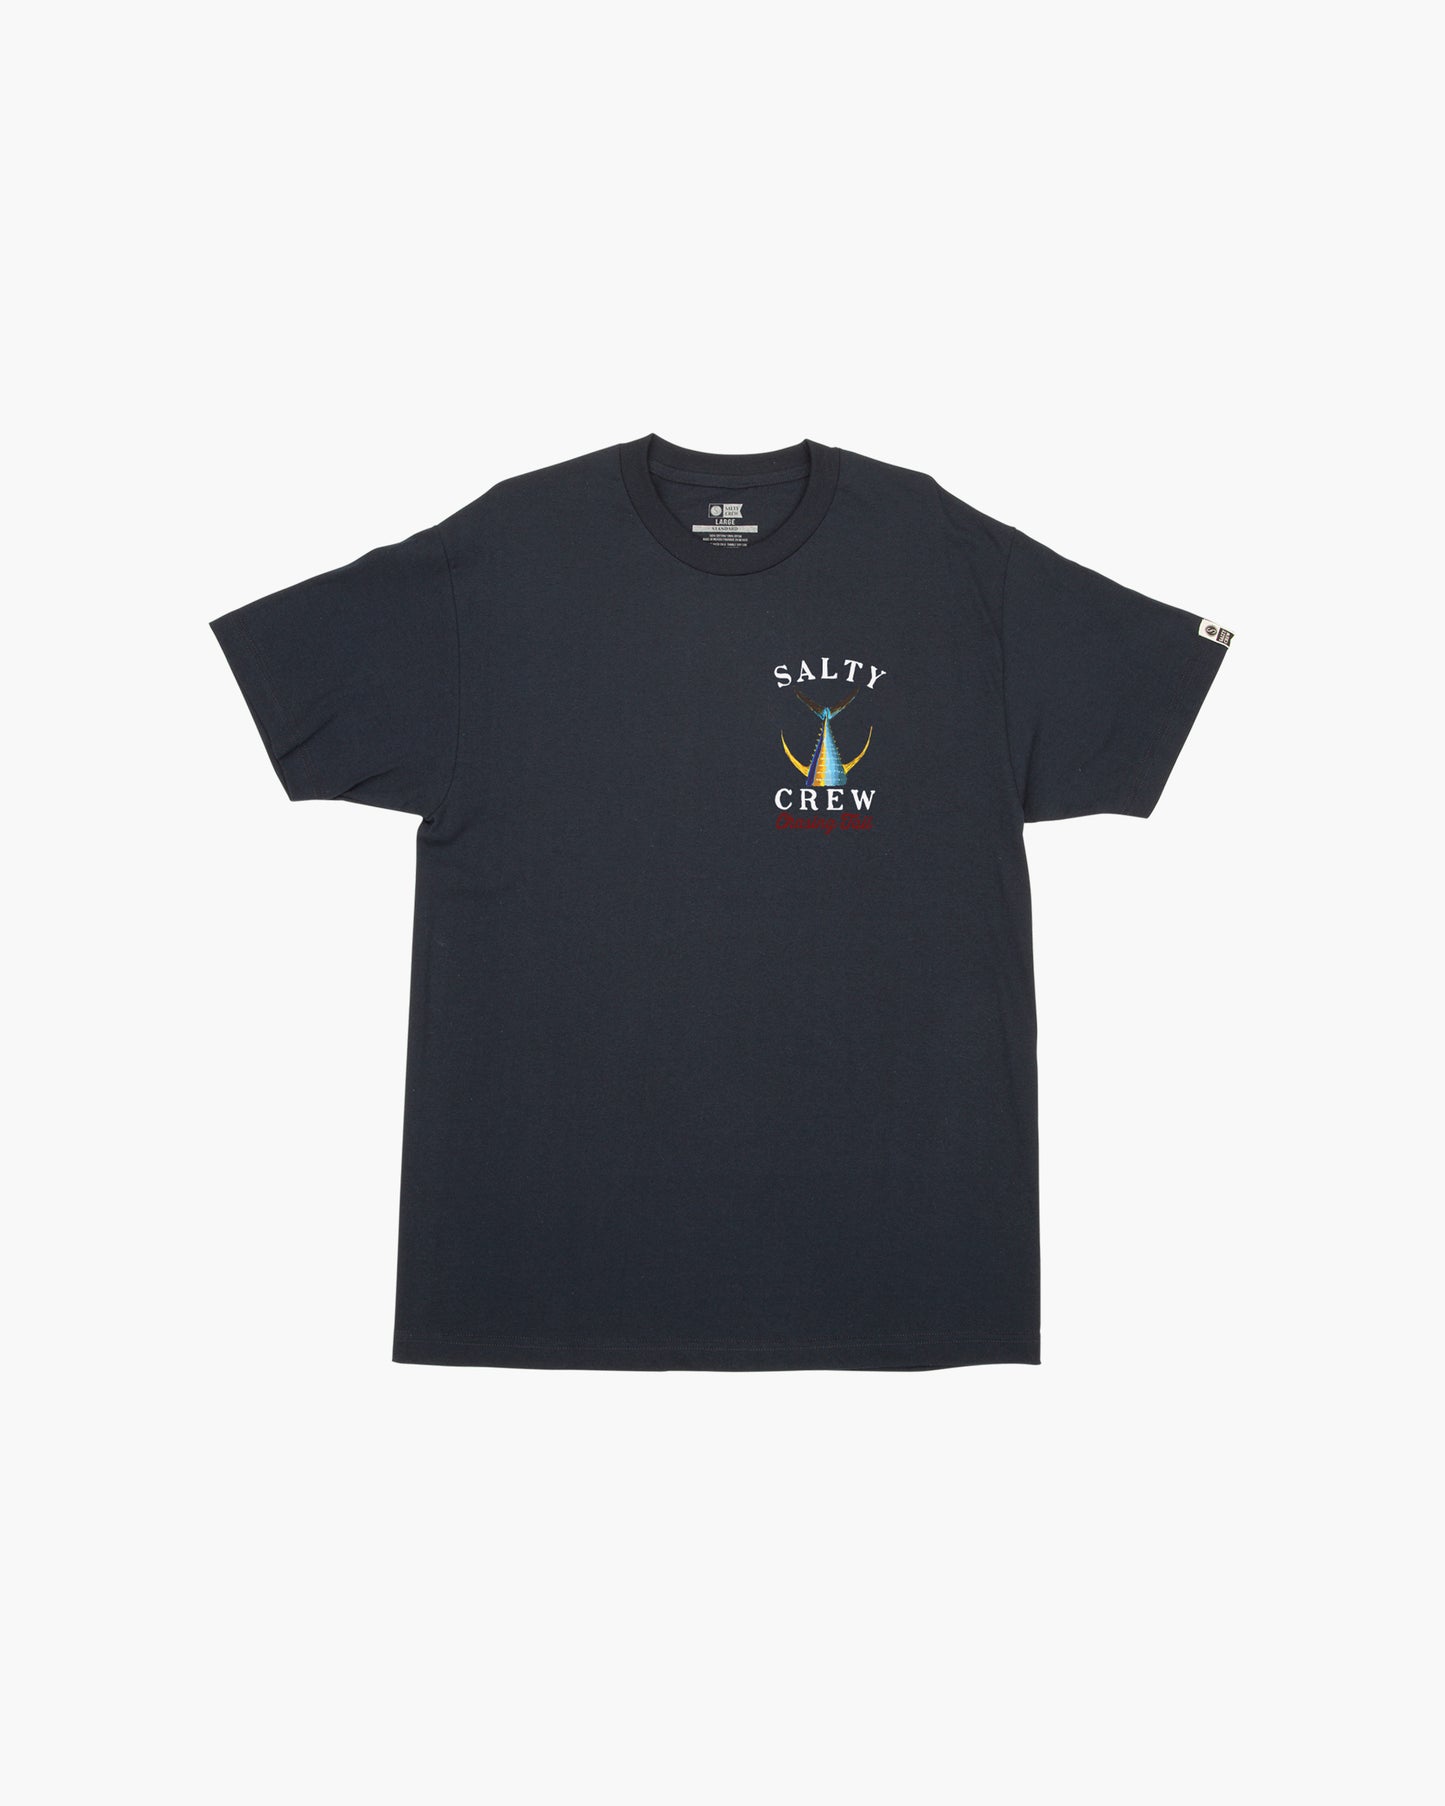 Off body front of Tailed Navy S/S Standard Tee